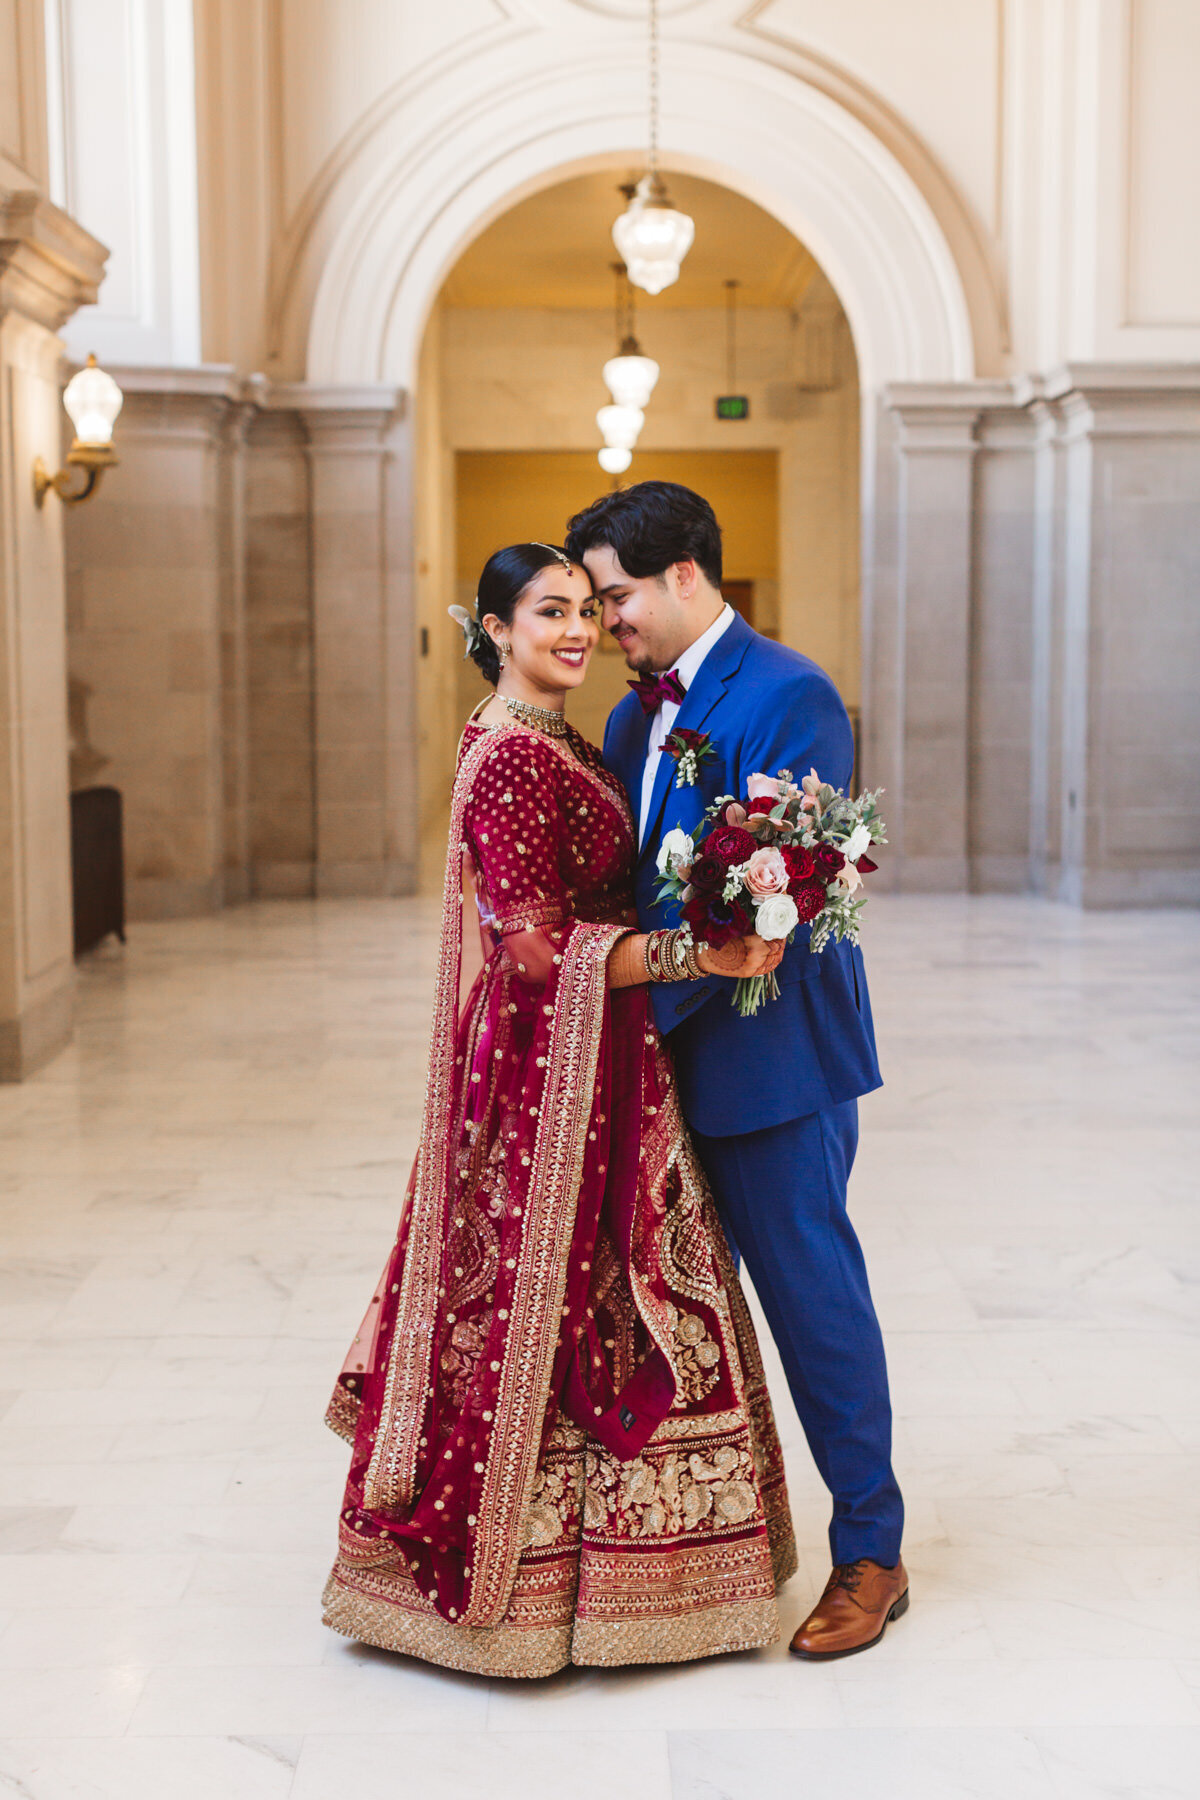 Indian wedding couple with bride in red wedding dress